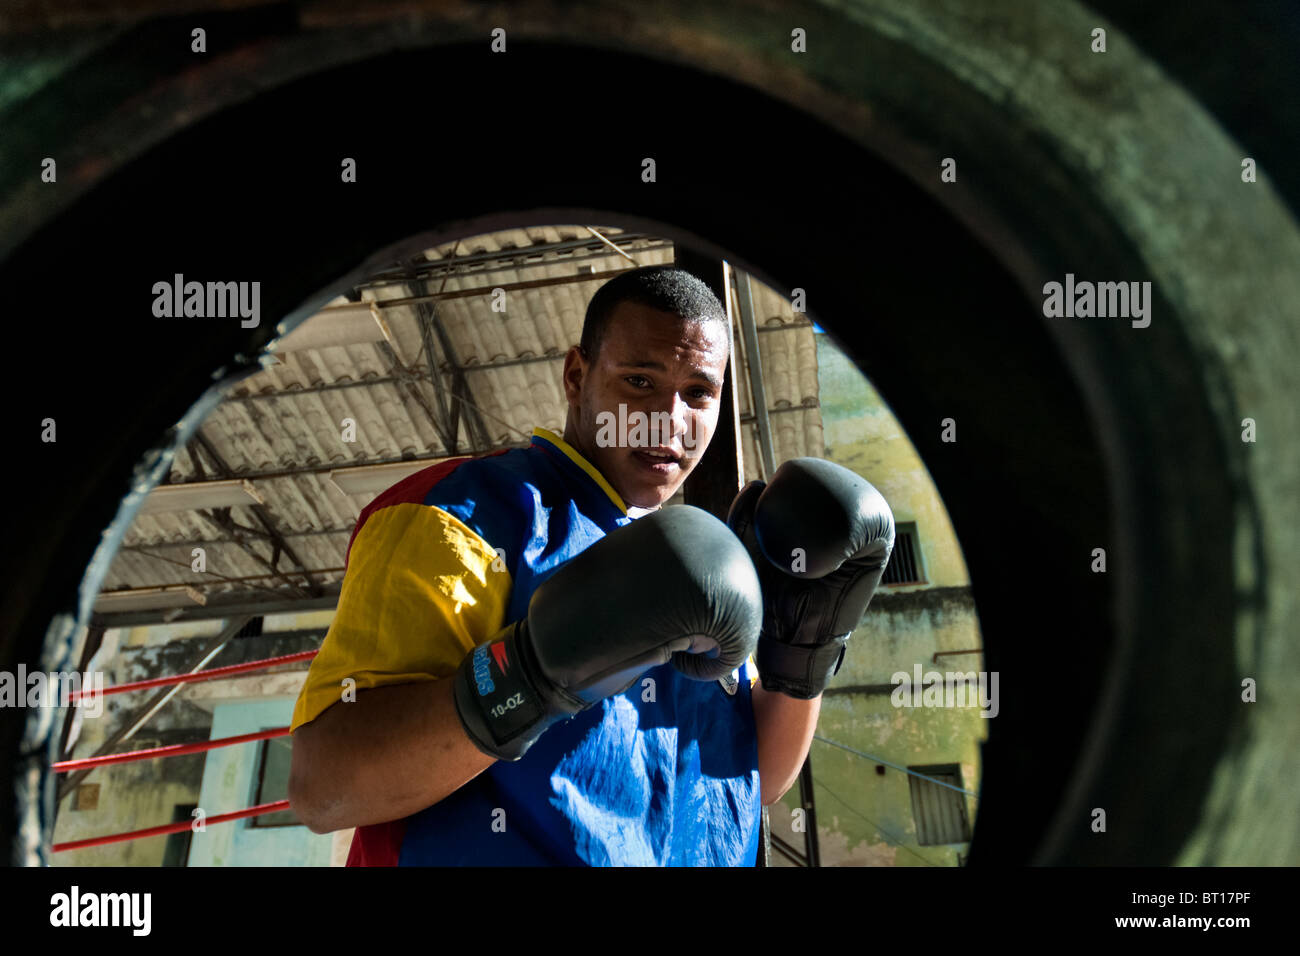 A Cuban boxer trains punches at Rafael Trejo boxing gym, an outdoor sport facility in the Old Havana, Cuba. Stock Photo